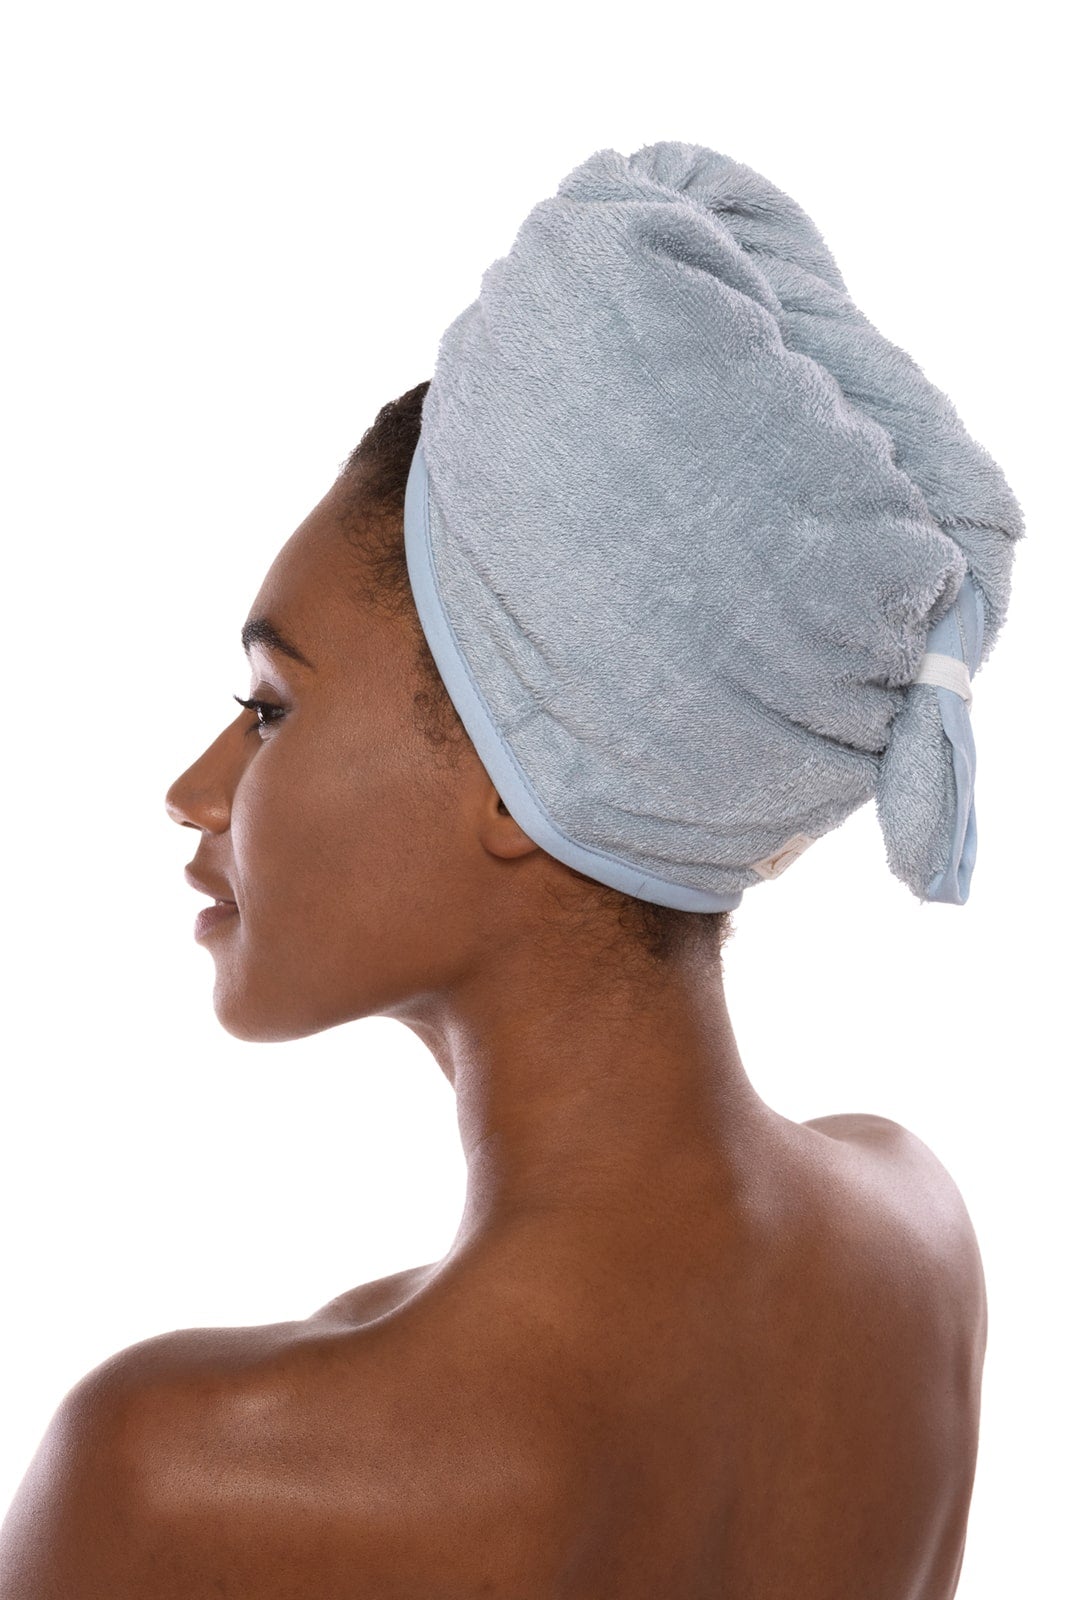 Texere Women's Terry Cloth Hair Towel Wrap | Fishers Finery